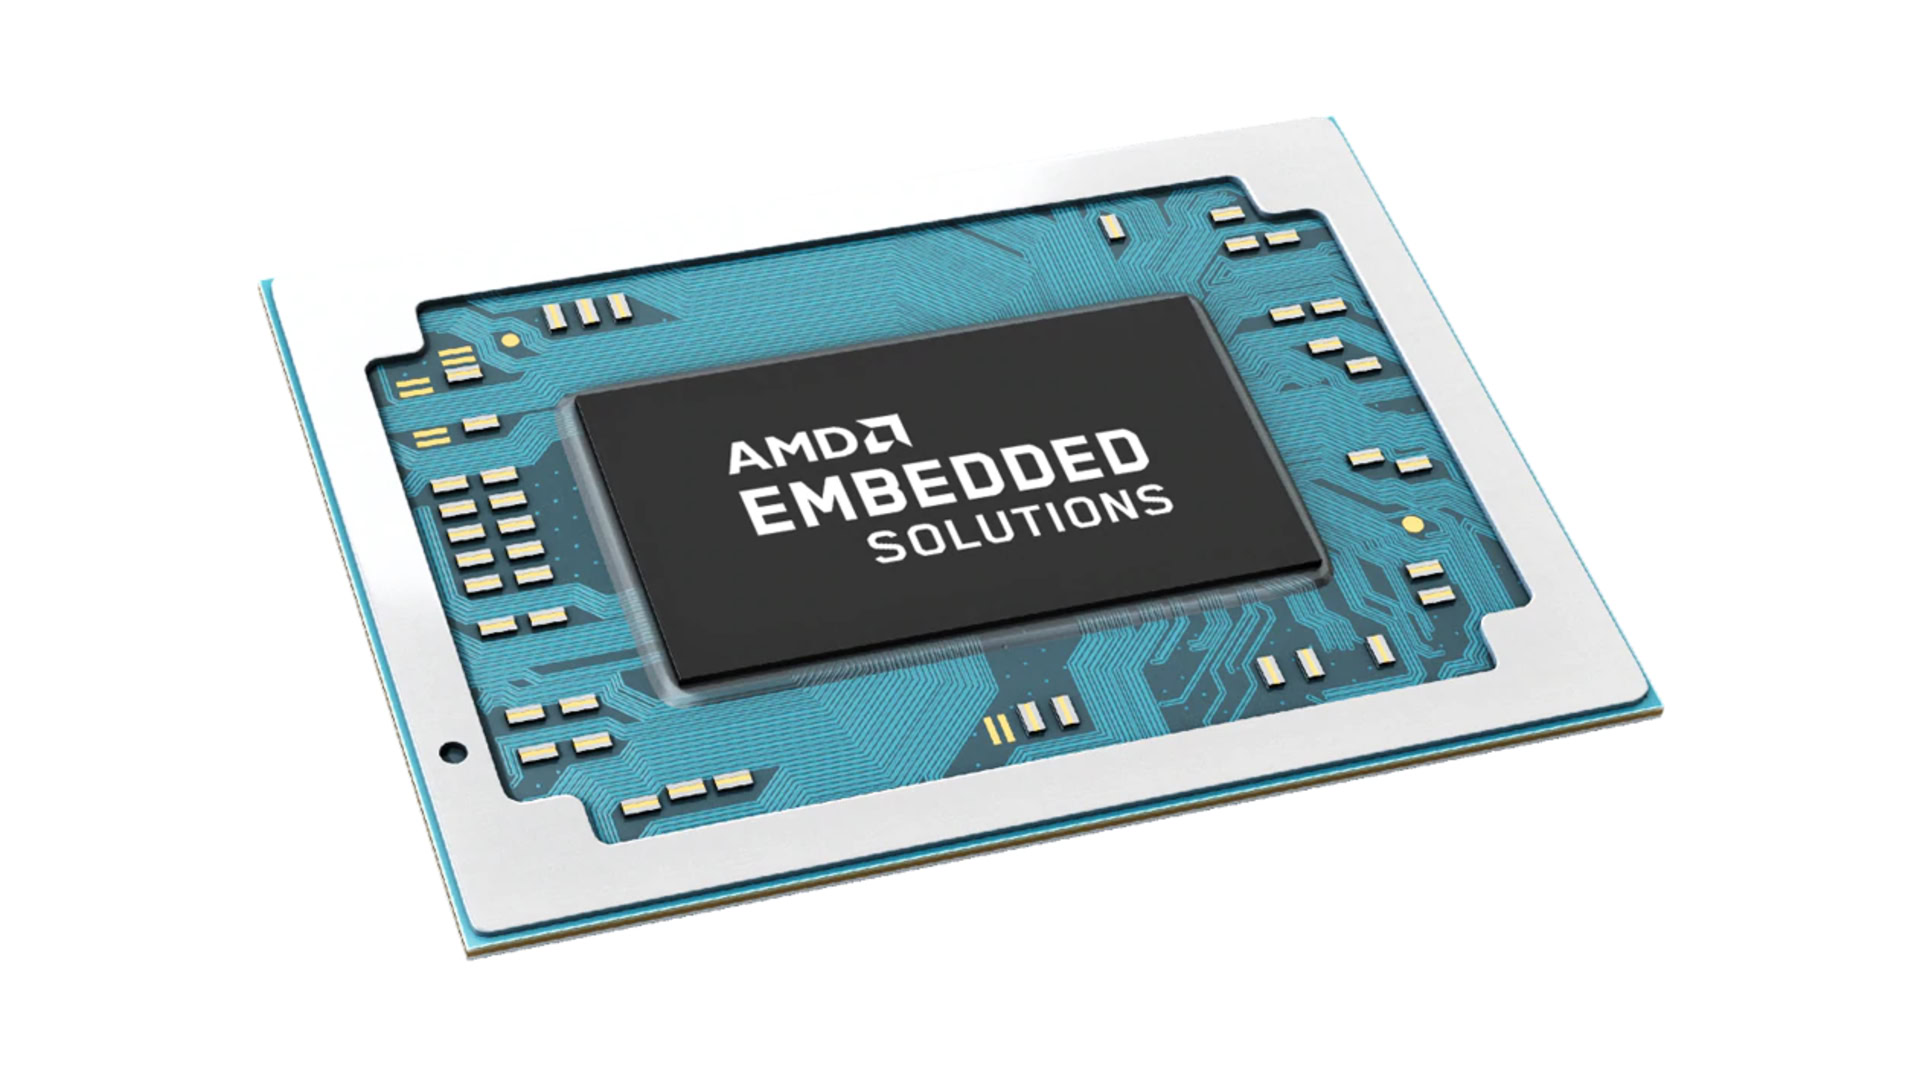 AMD embedded processor on a white background